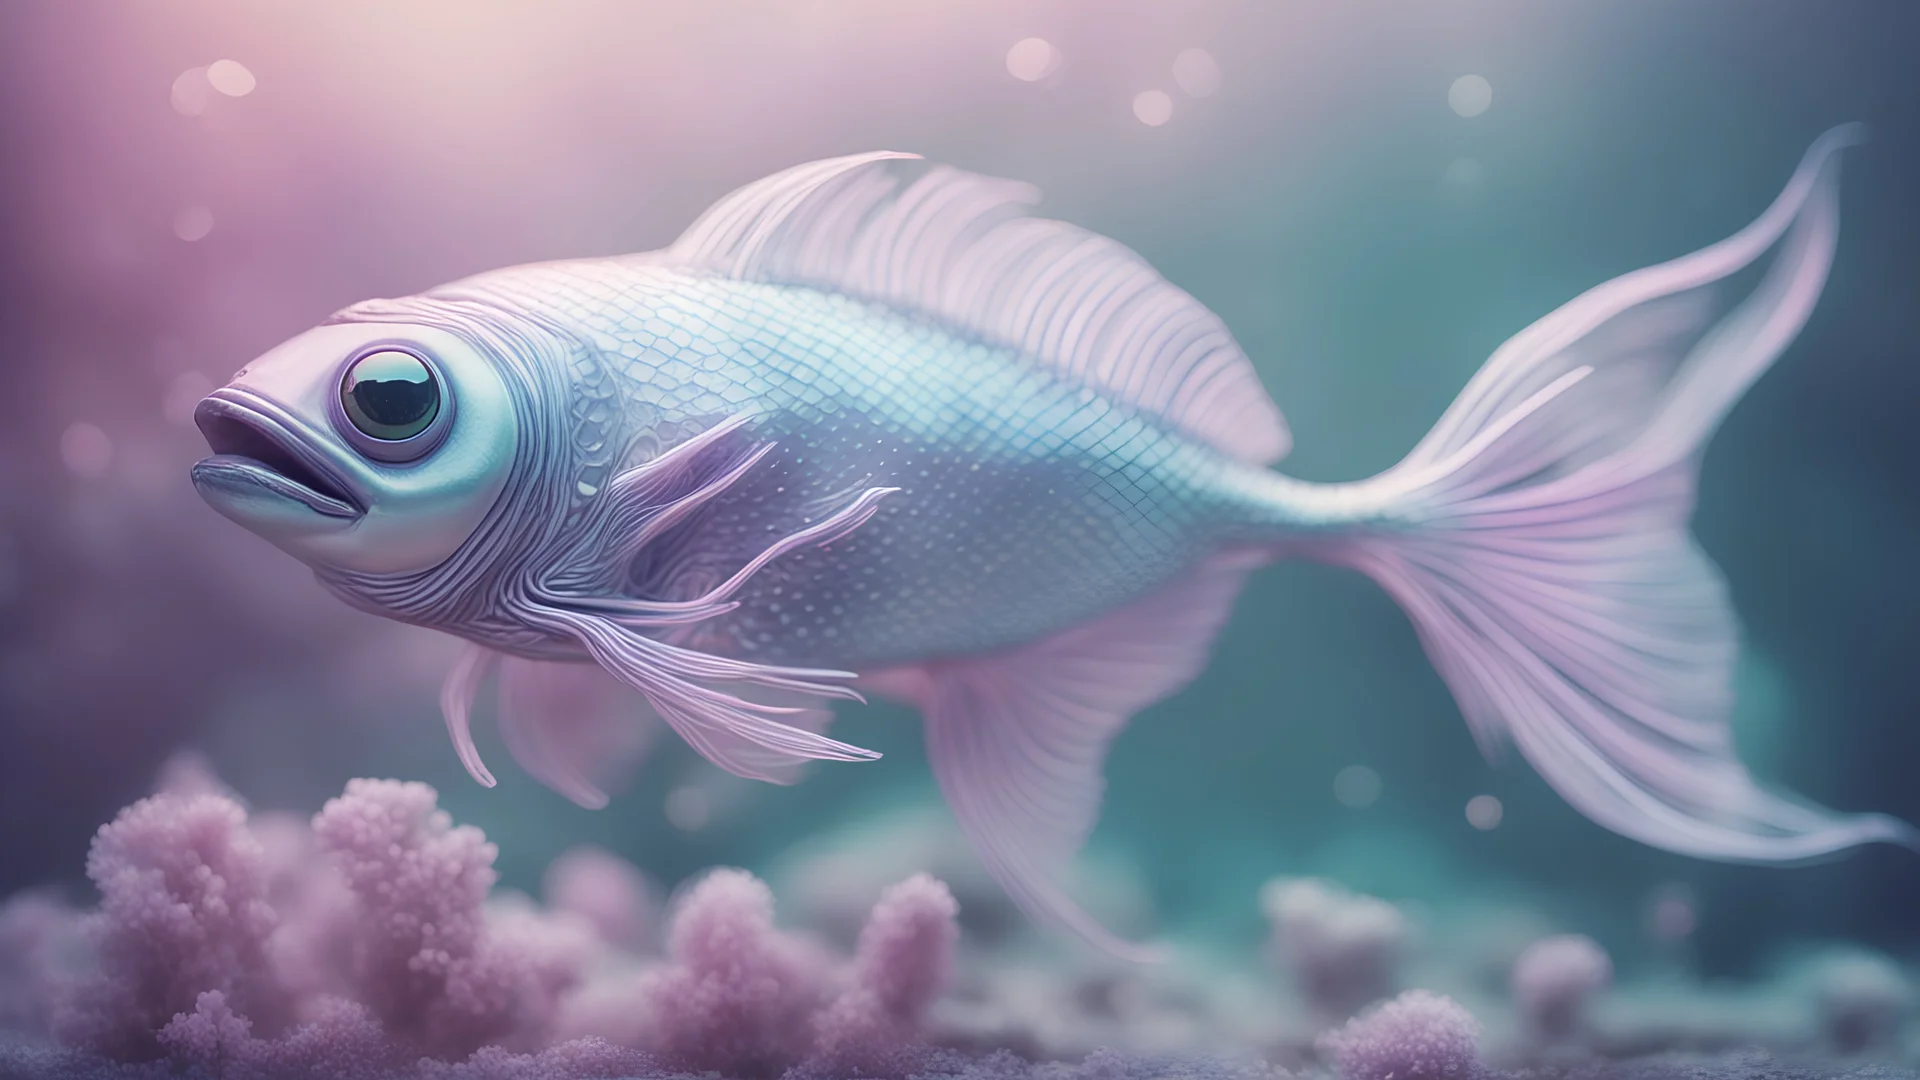 A shimmering silvery alien creature resembling a fish, its unique features captured in a pastel tones analog photograph. The image evokes a sense of nostalgia and otherworldly beauty, with delicate hues blending seamlessly to create a dreamlike atmosphere. The alien's iridescent scales reflect soft shades of lavender and mint, giving it an ethereal appearance. Each intricate detail is meticulously preserved in the high-quality image, allowing viewers to marvel at the creature's mysterious allure